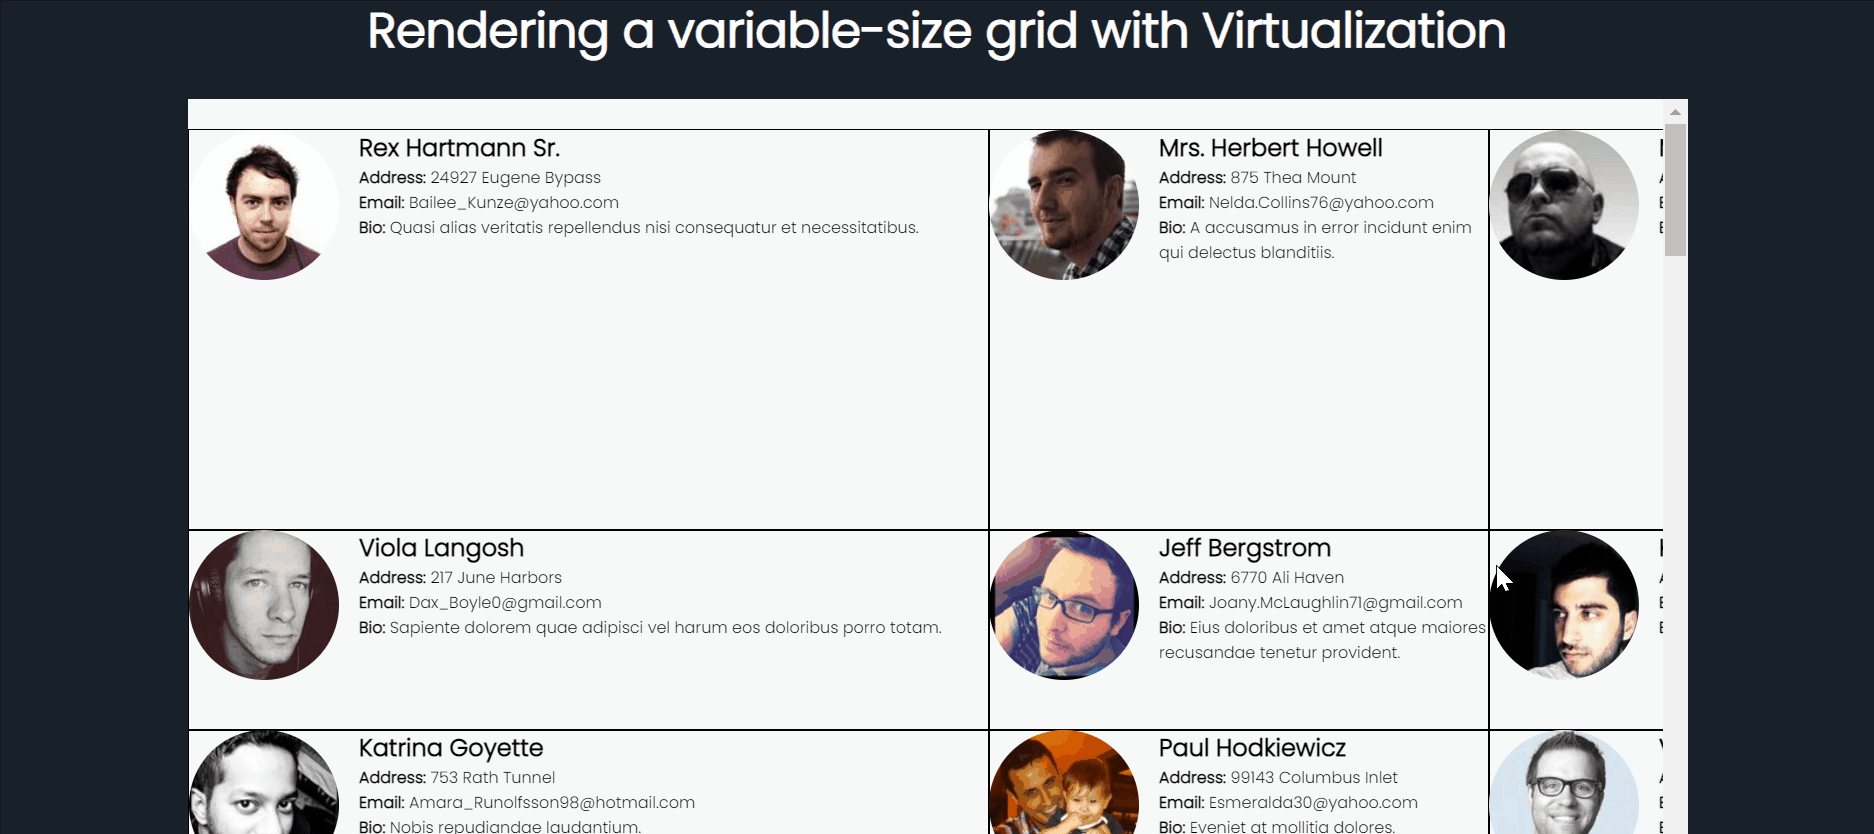 Rendering a variable-size grid with virtualization